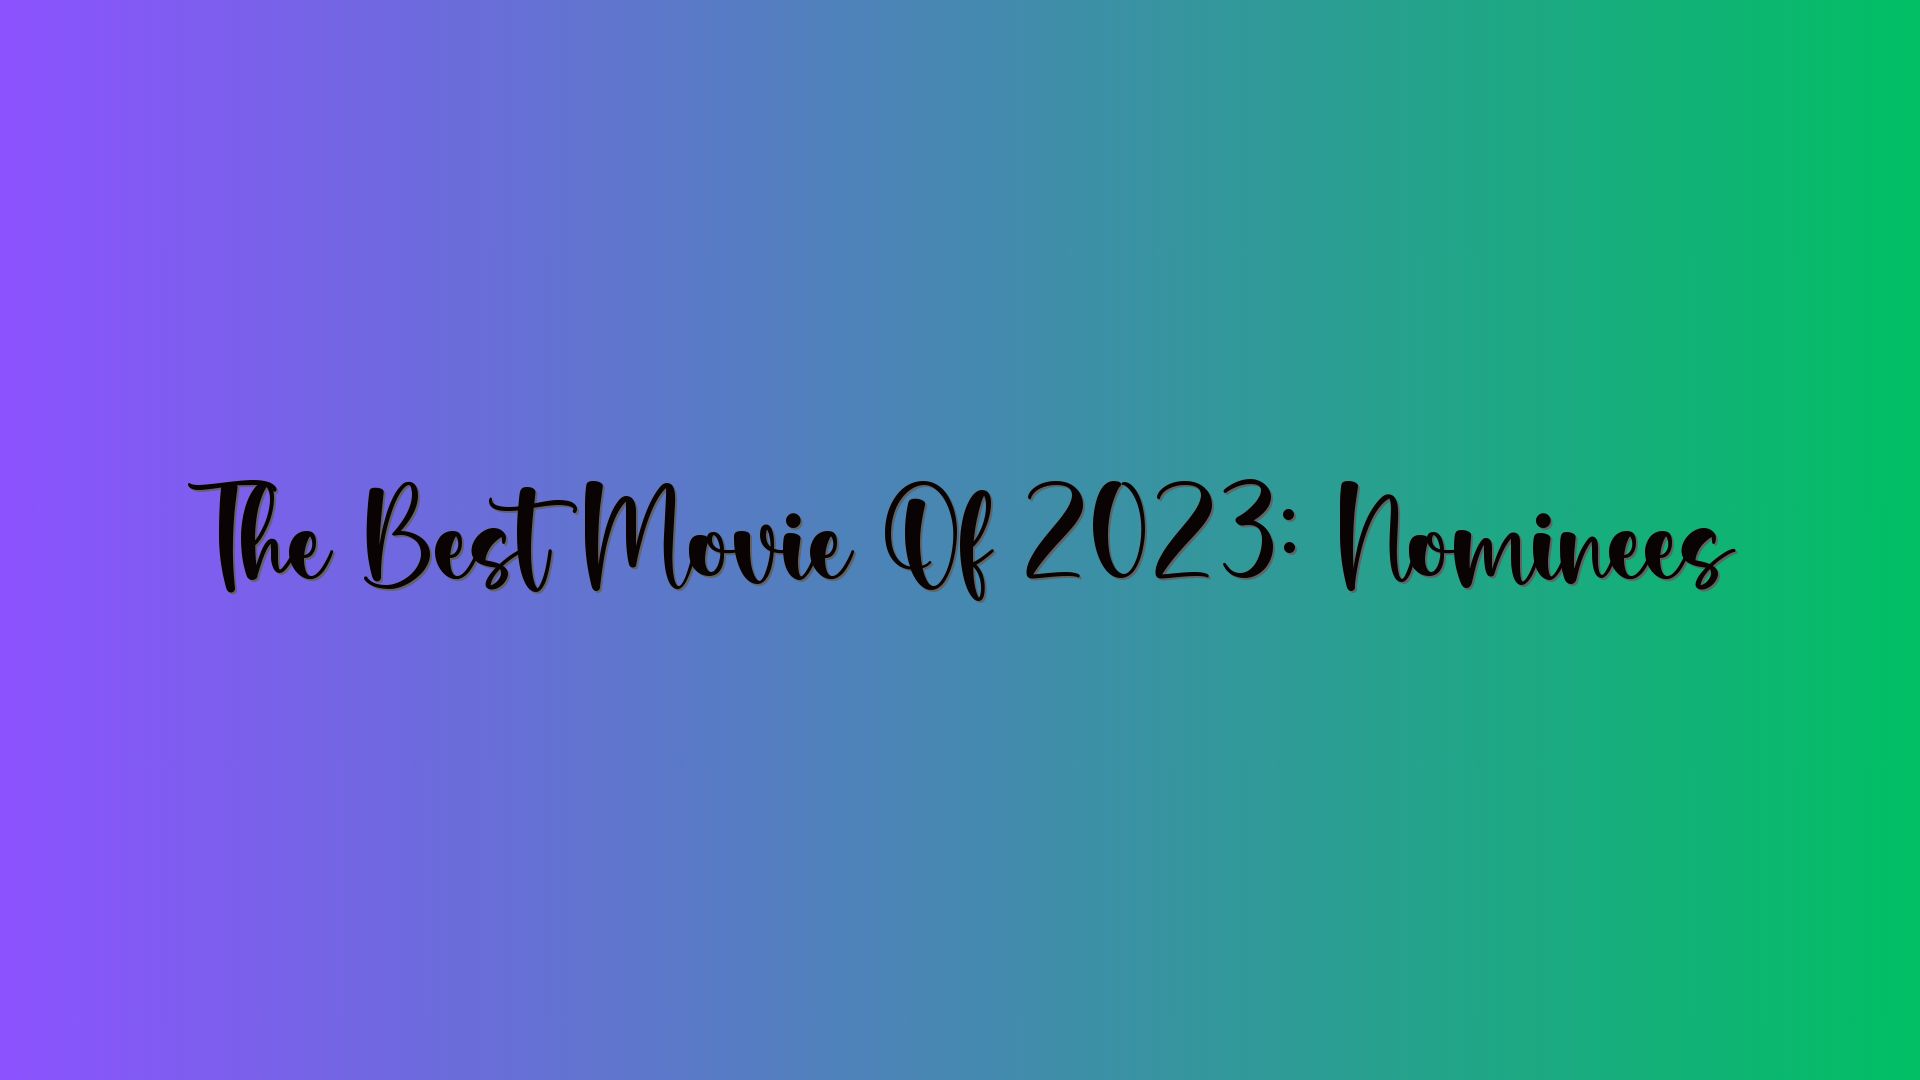 The Best Movie Of 2023: Nominees